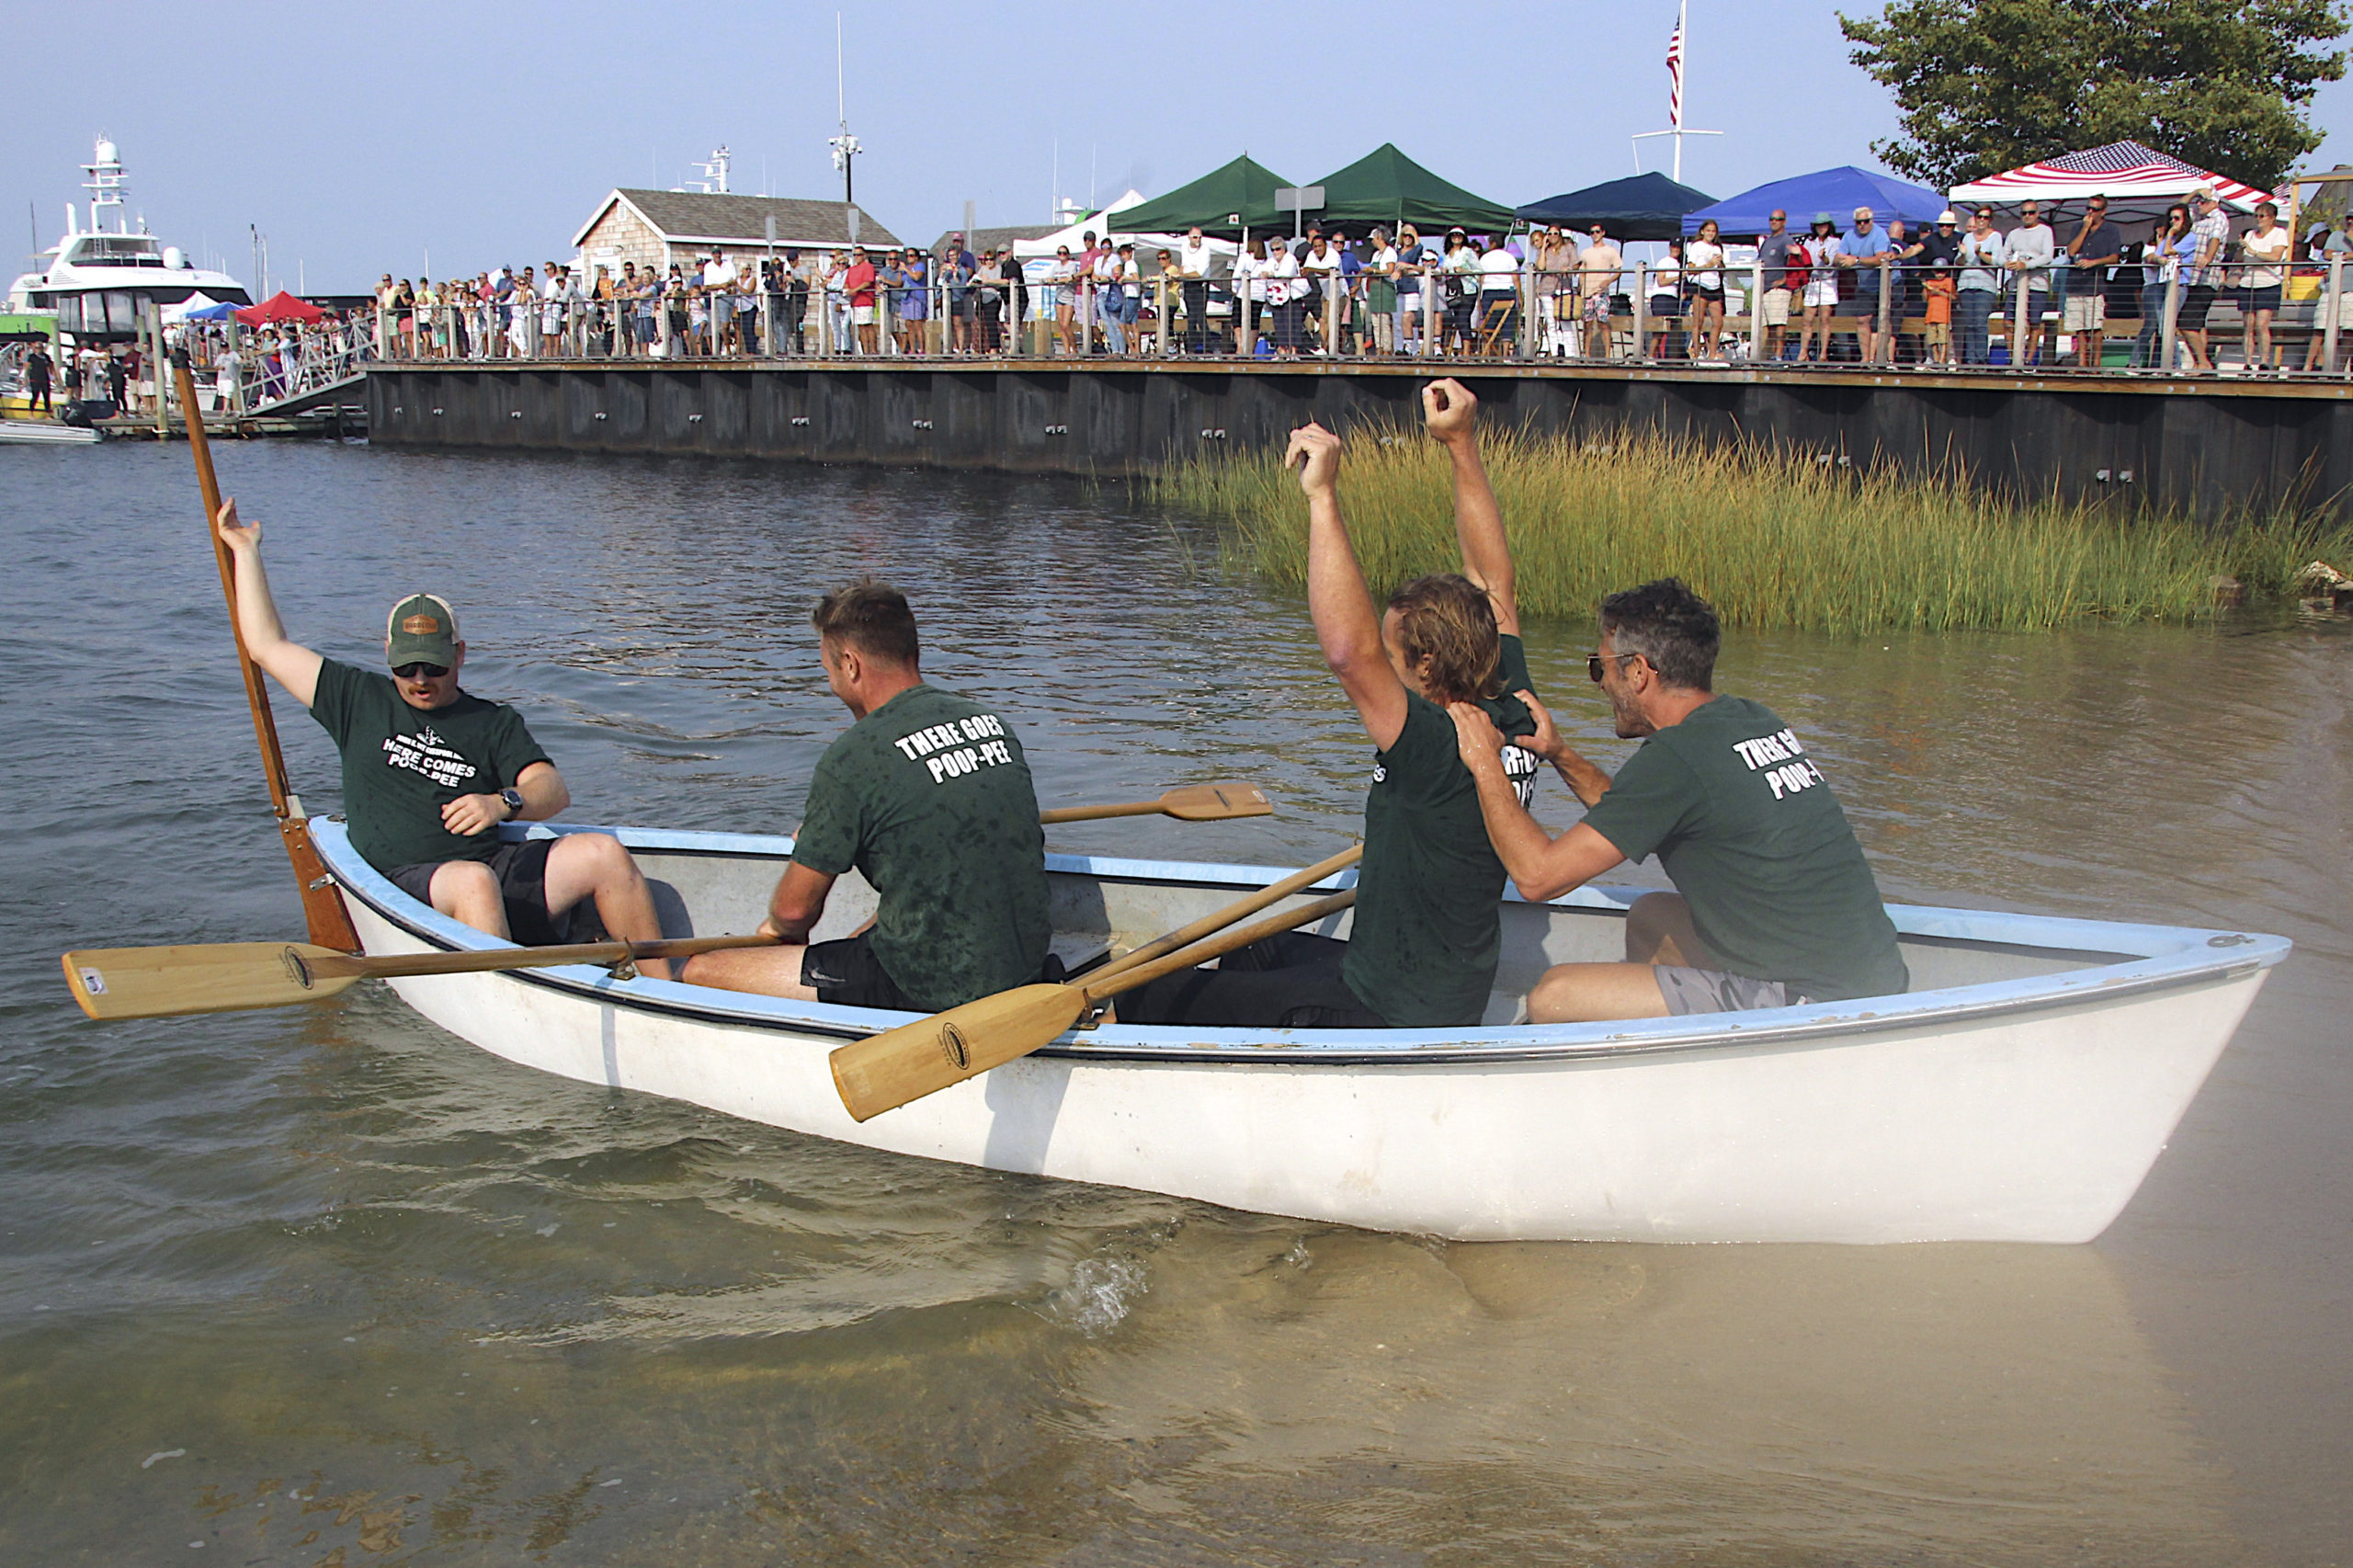 The champion men’s whaleboat team from John K. Ott Cesspool Services included, from left to right, Jeff Greenwald, Brian O’Sullivan, Pete Finelli, Eric Bramoff and Kevin O’Brien Jr.  KYRIL BROMLEY